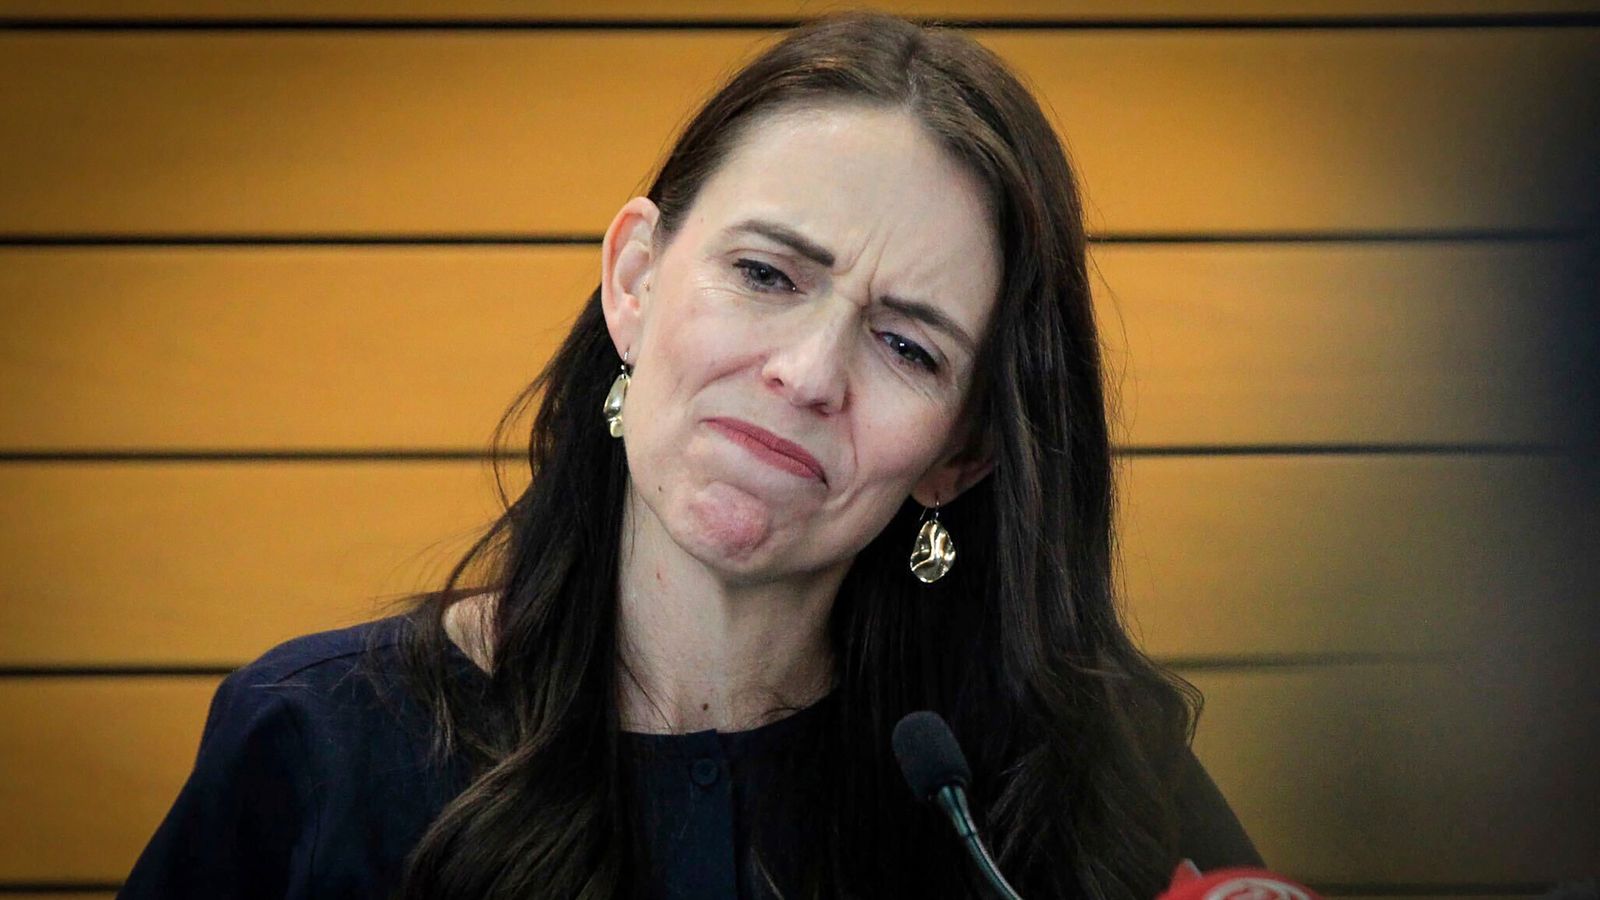 Jacinda Ardern to resign as New Zealand's PM